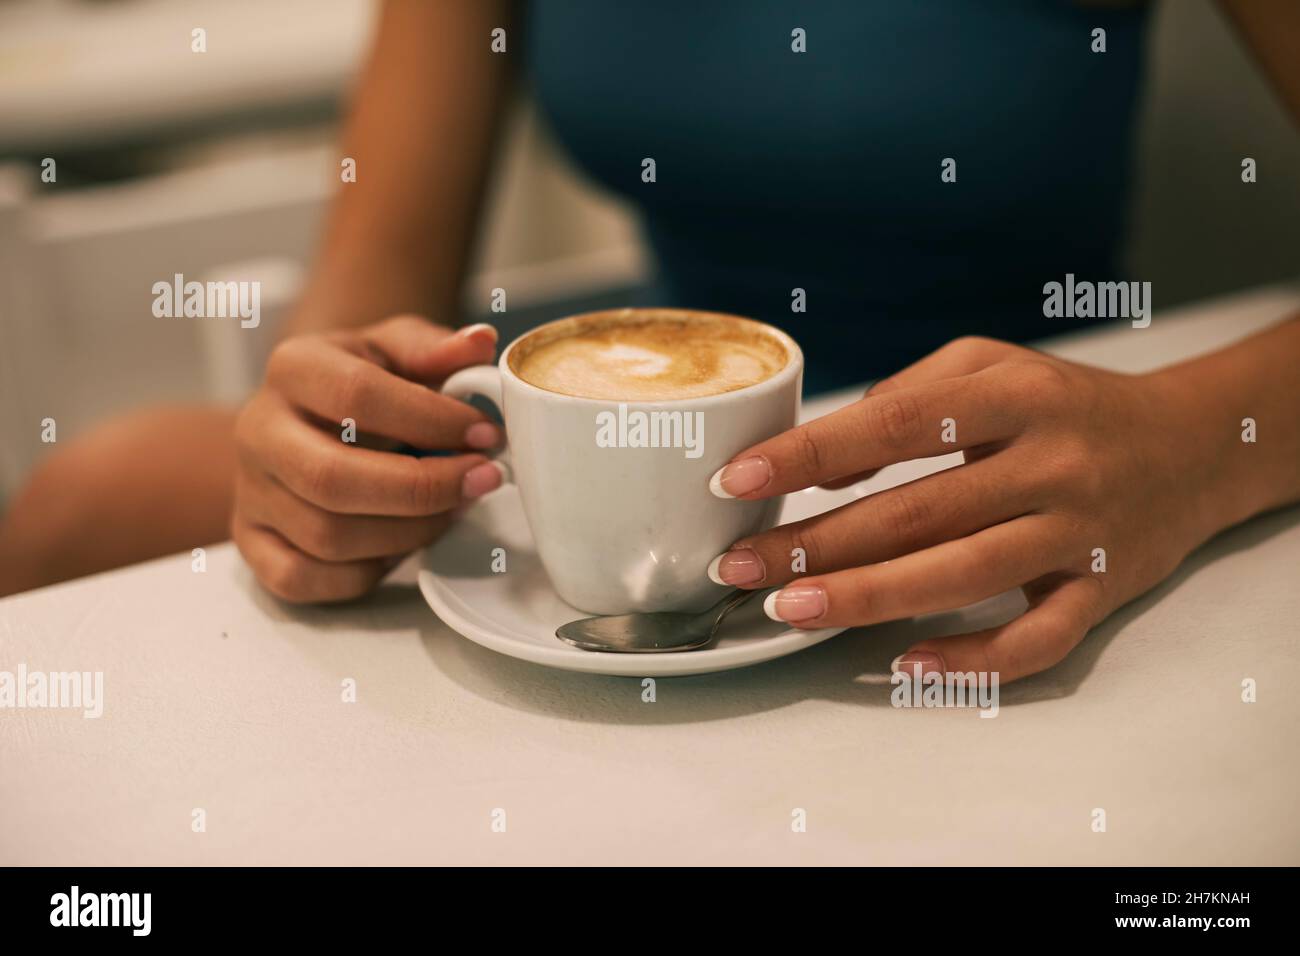 Young woman with manicured nails having coffee at cafe Stock Photo